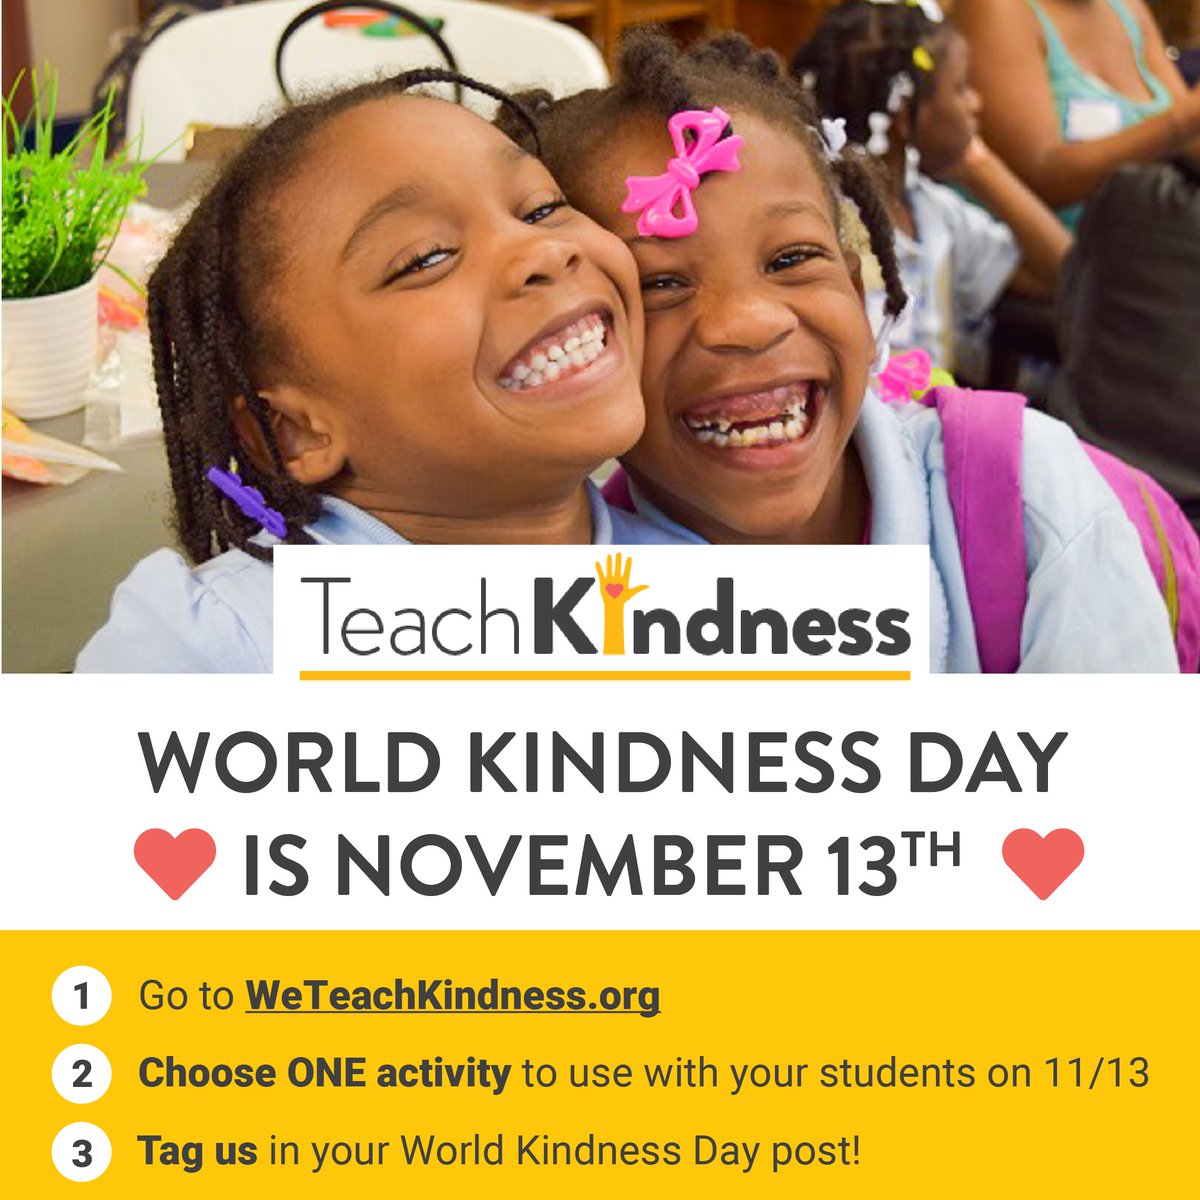 I forgot to post this morning for World Kindness Day! Felt terrible, then thought, actually, it's great to #TeachKindness any day of the year! @WeTeachKindness